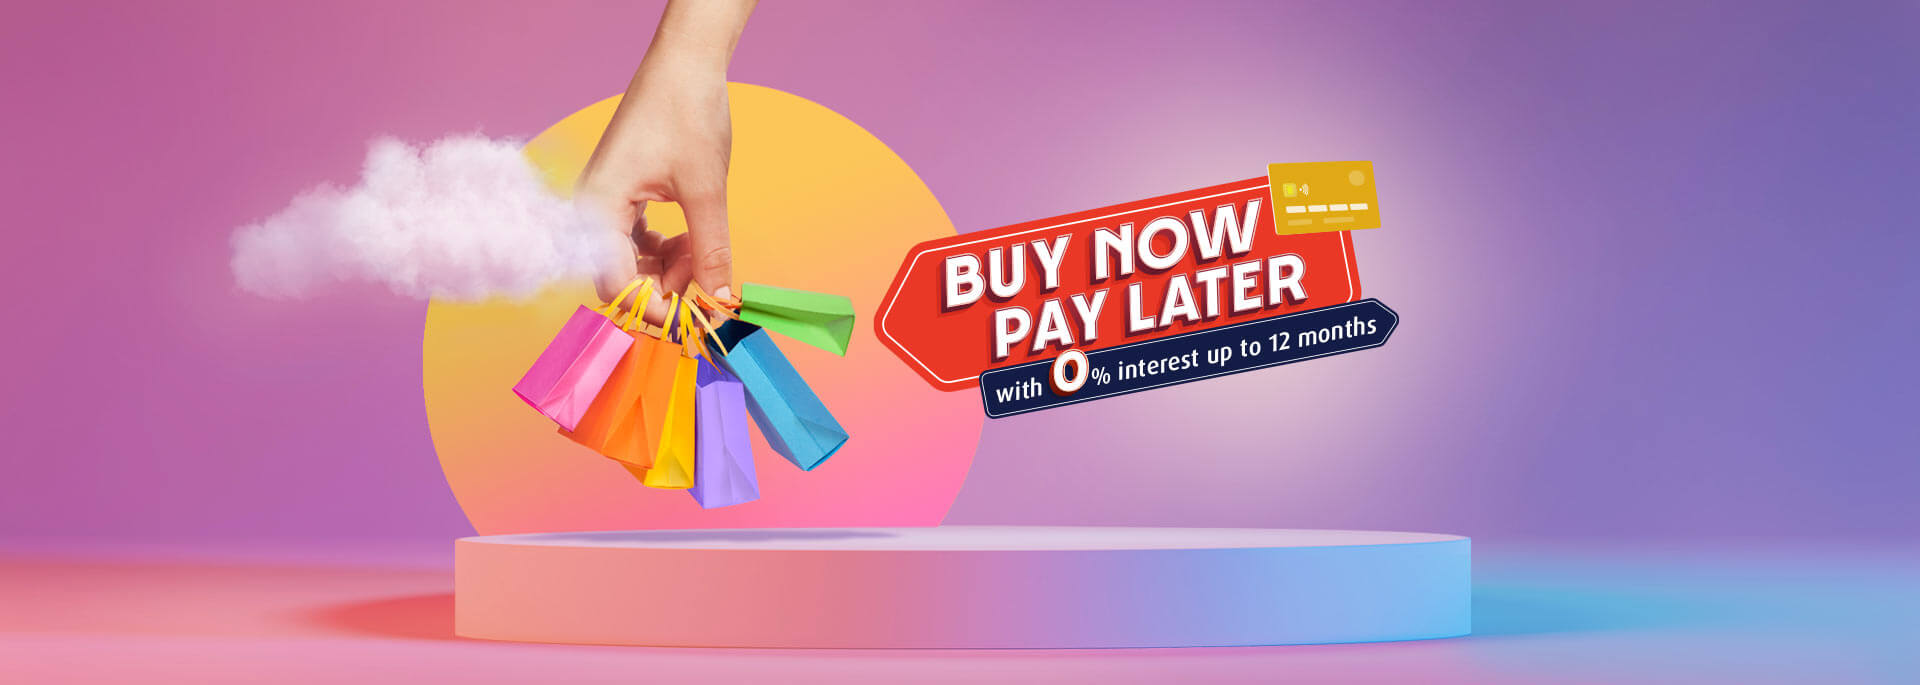 Buy Now Pay Later with 0% interest up to 12 months